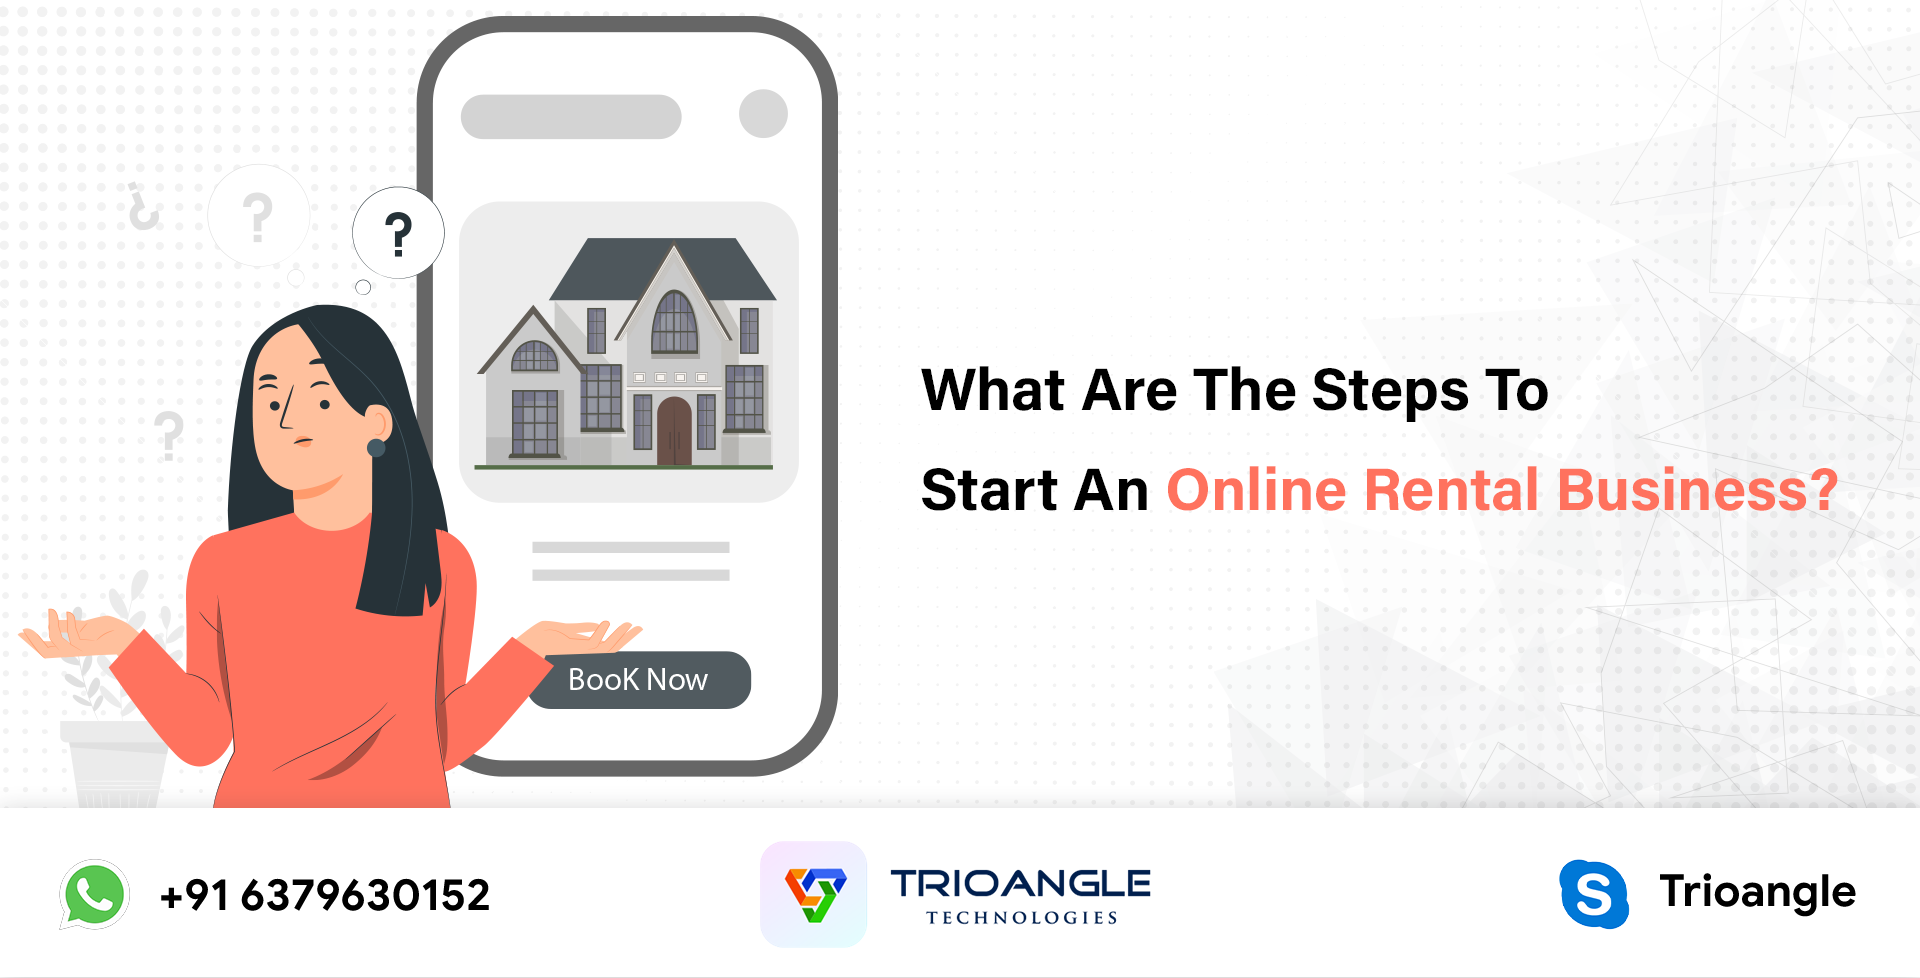 Rental Script: What Are The Steps To Start An Online Rental Business?